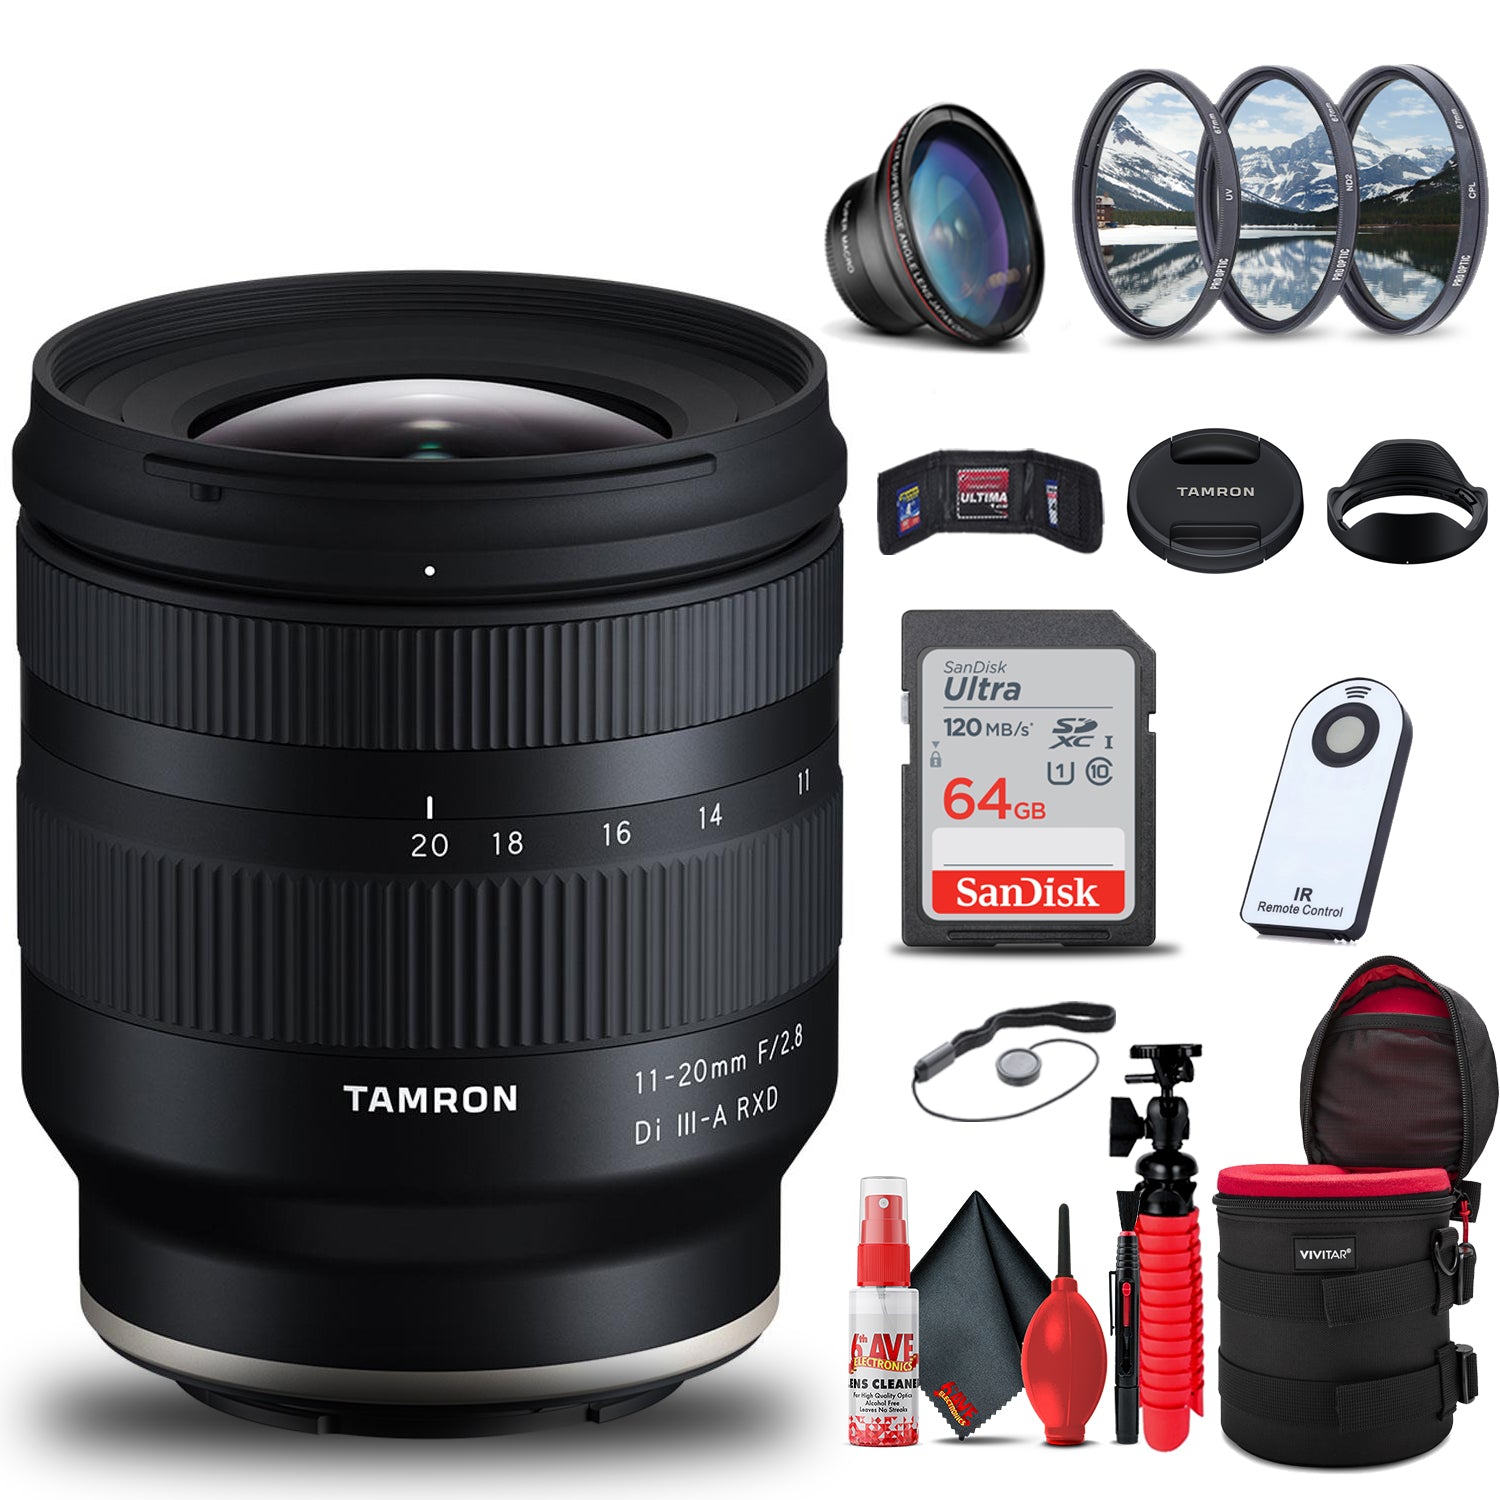 Tamron 11-20mm f/2.8 Di III-A RXD Lens for Sony E + 64GB Accessory Bundle